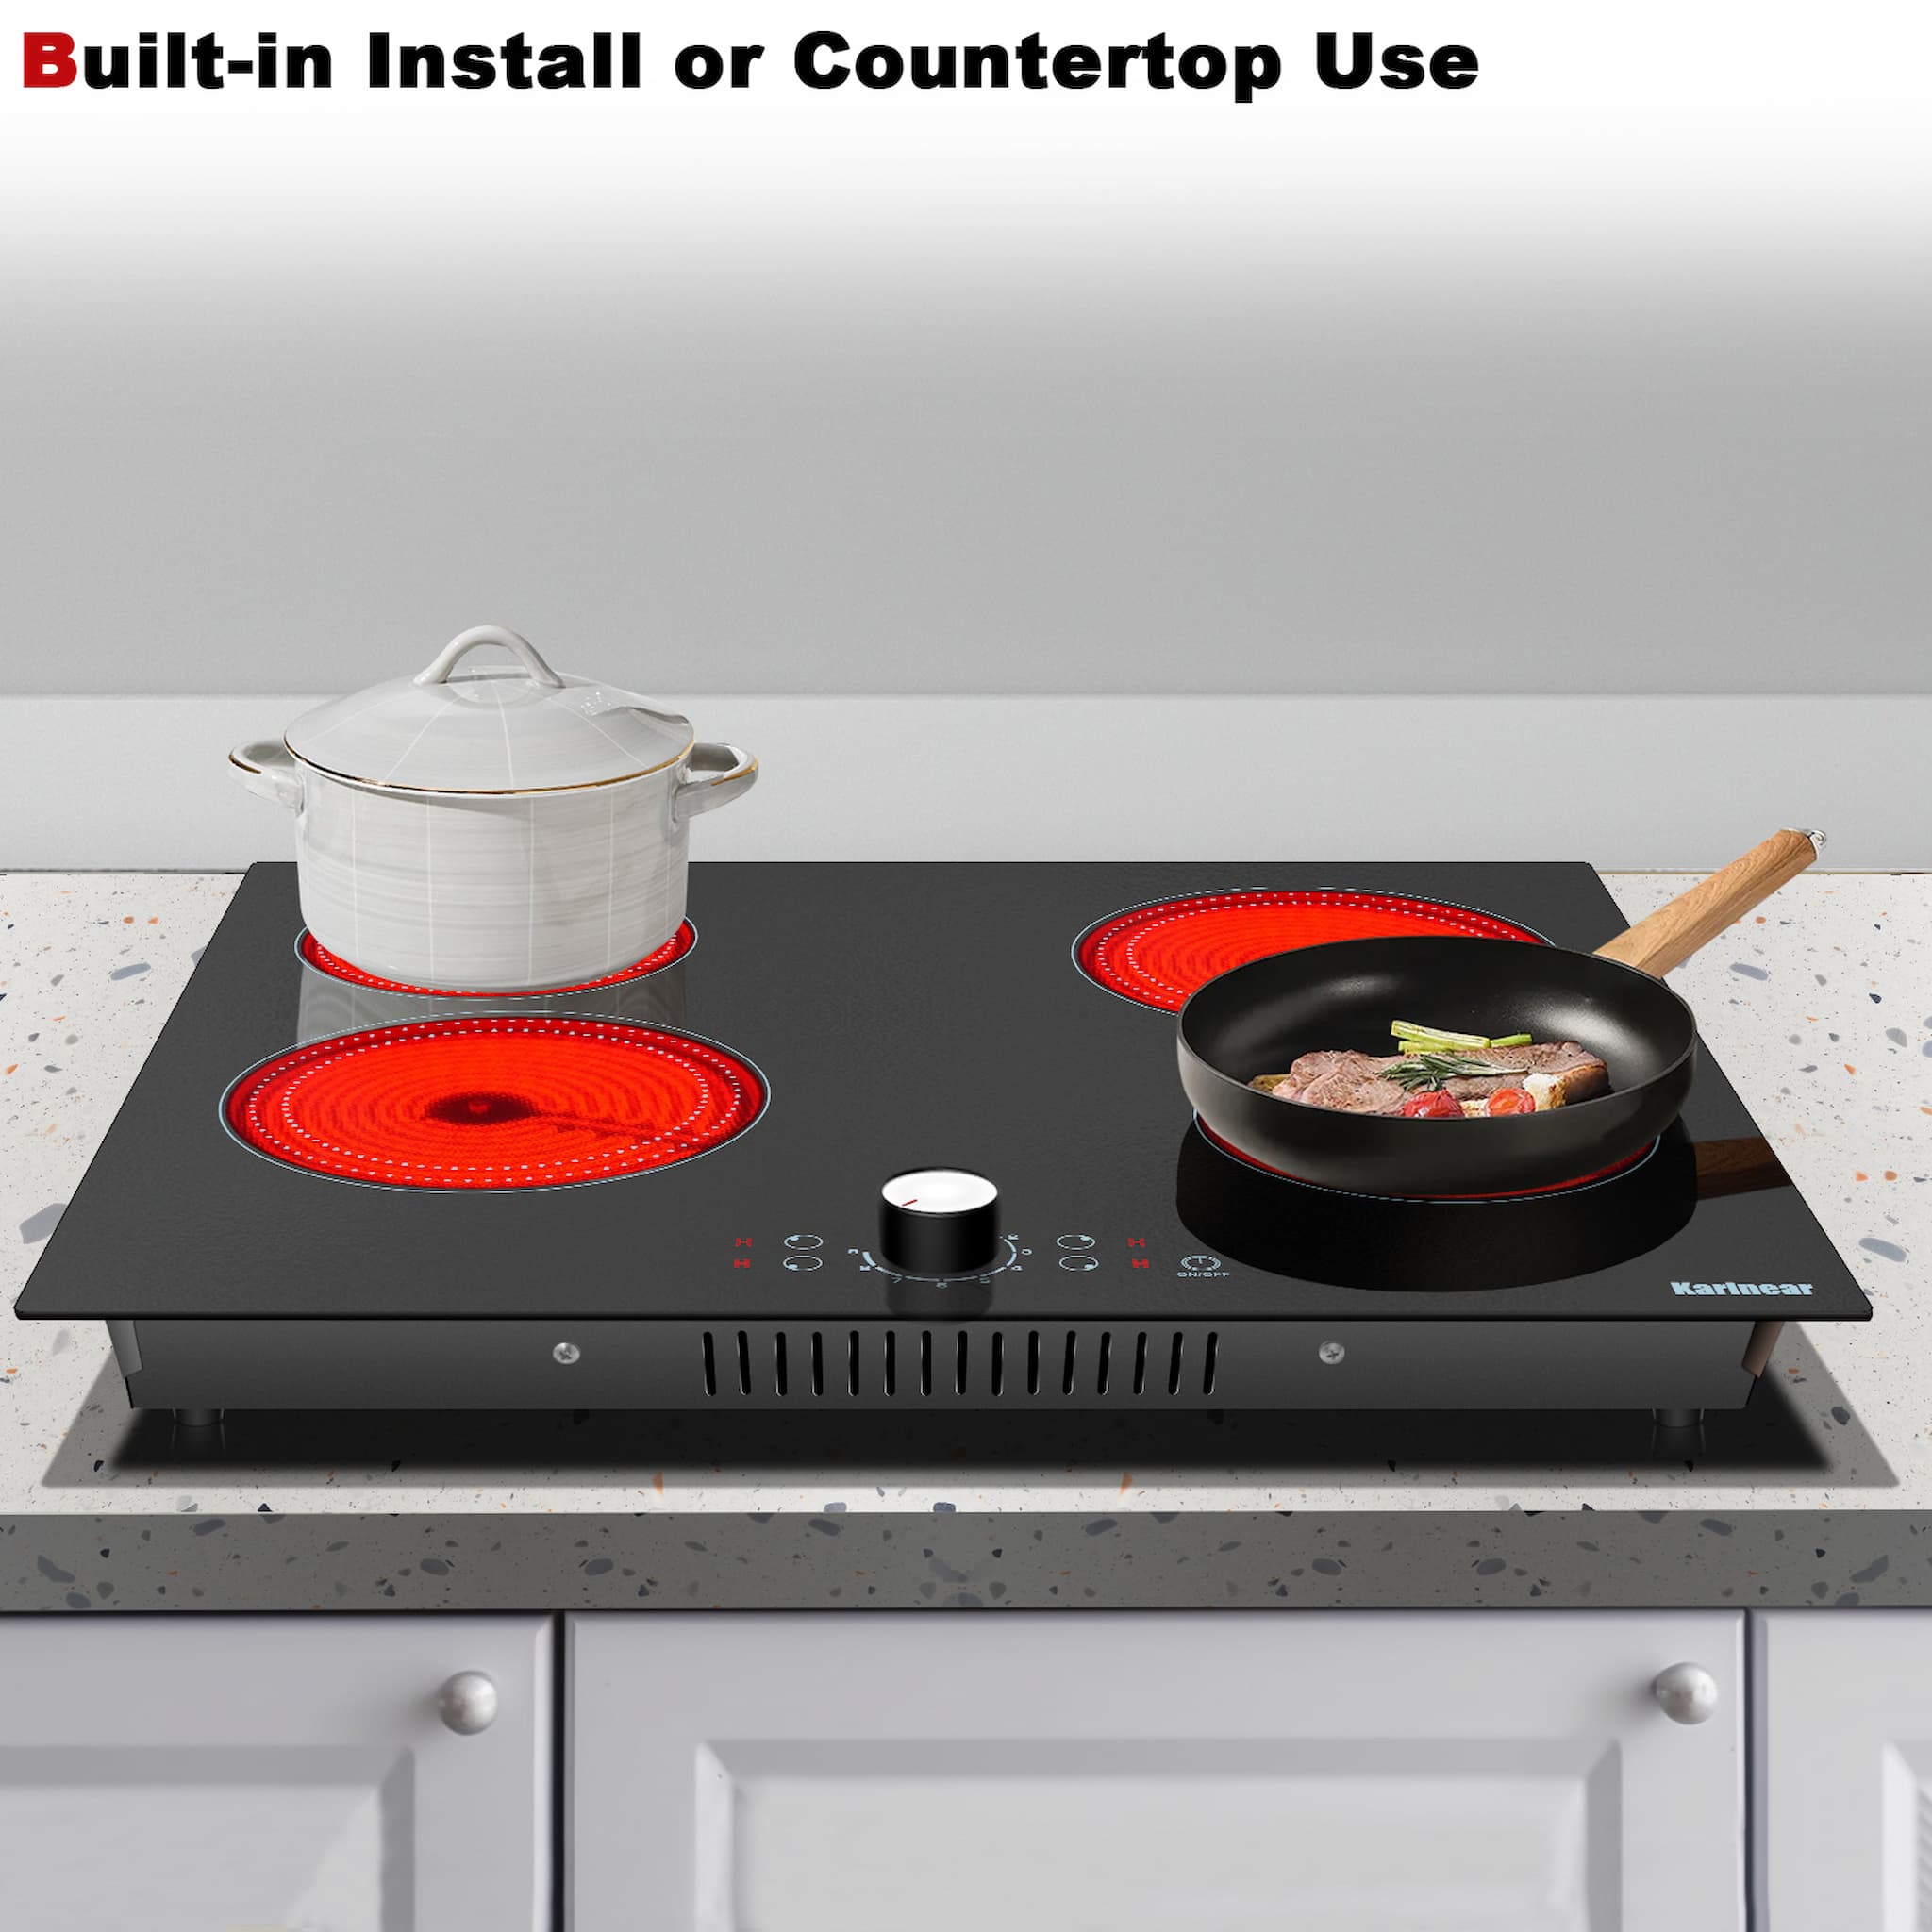 Karinear 30 Inch 4 Burners Drop-in Induction Cooktop